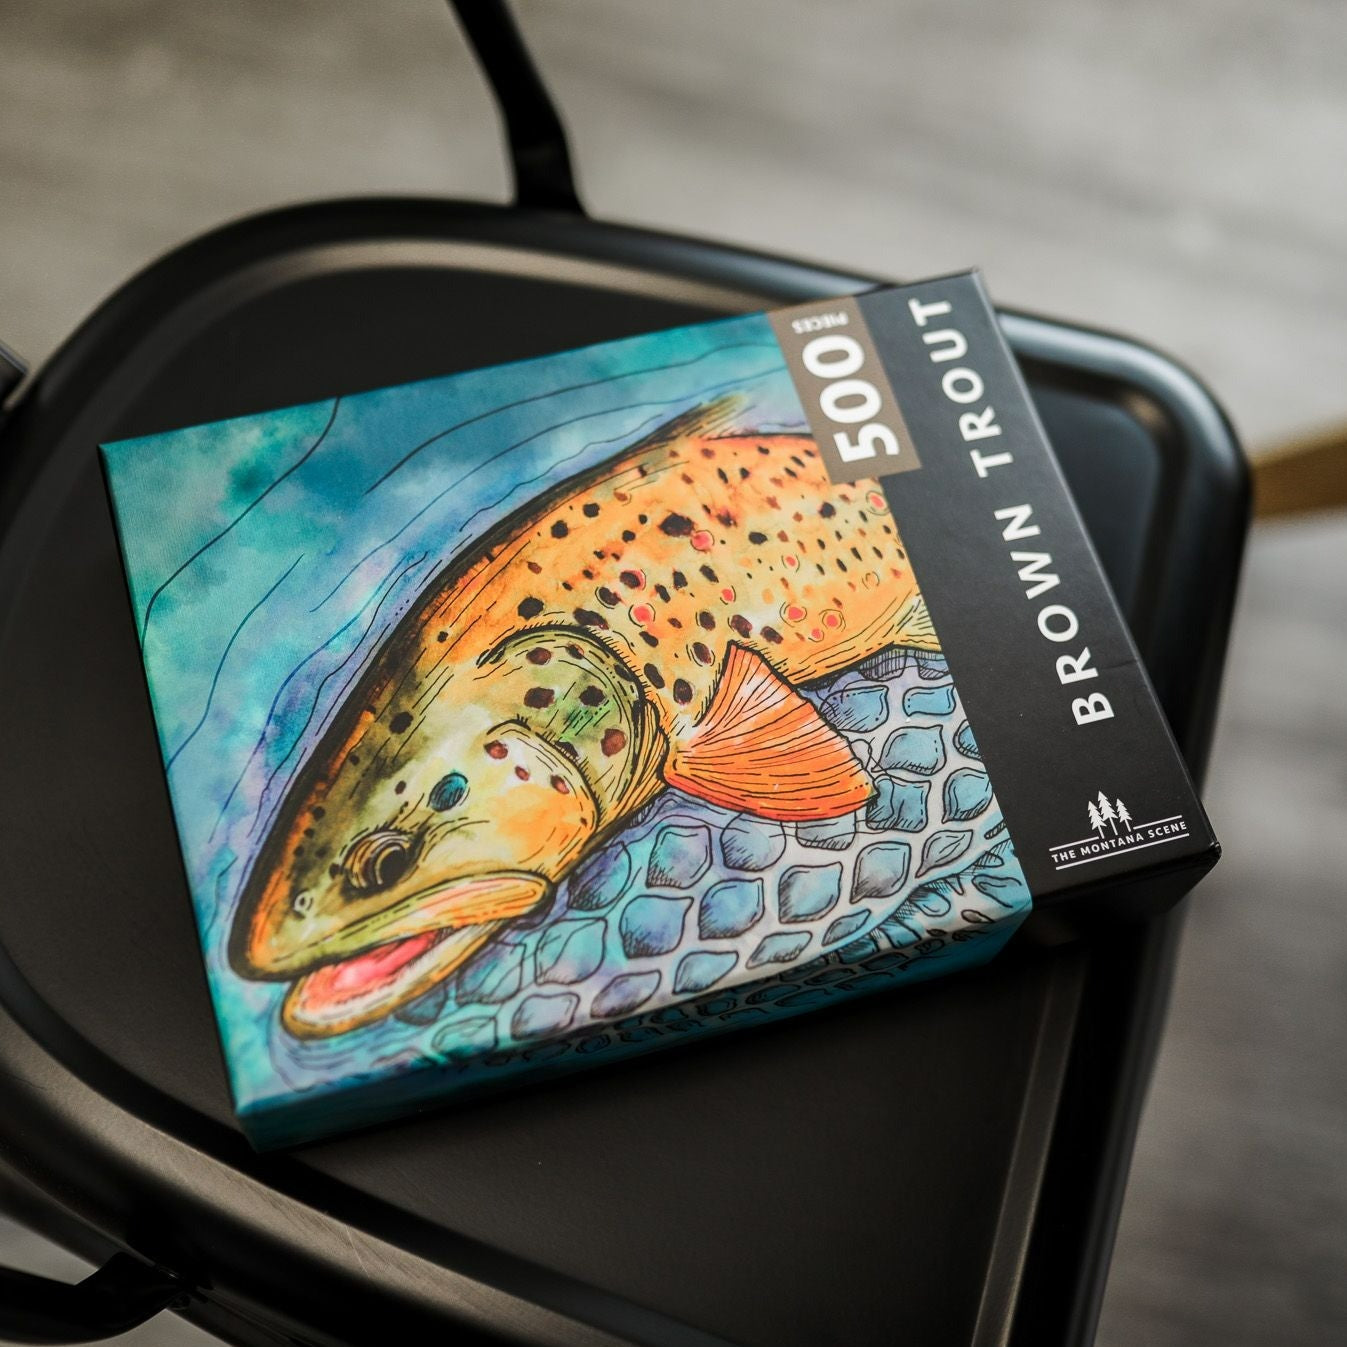 Brown Trout | 500 Piece Jigsaw Puzzle